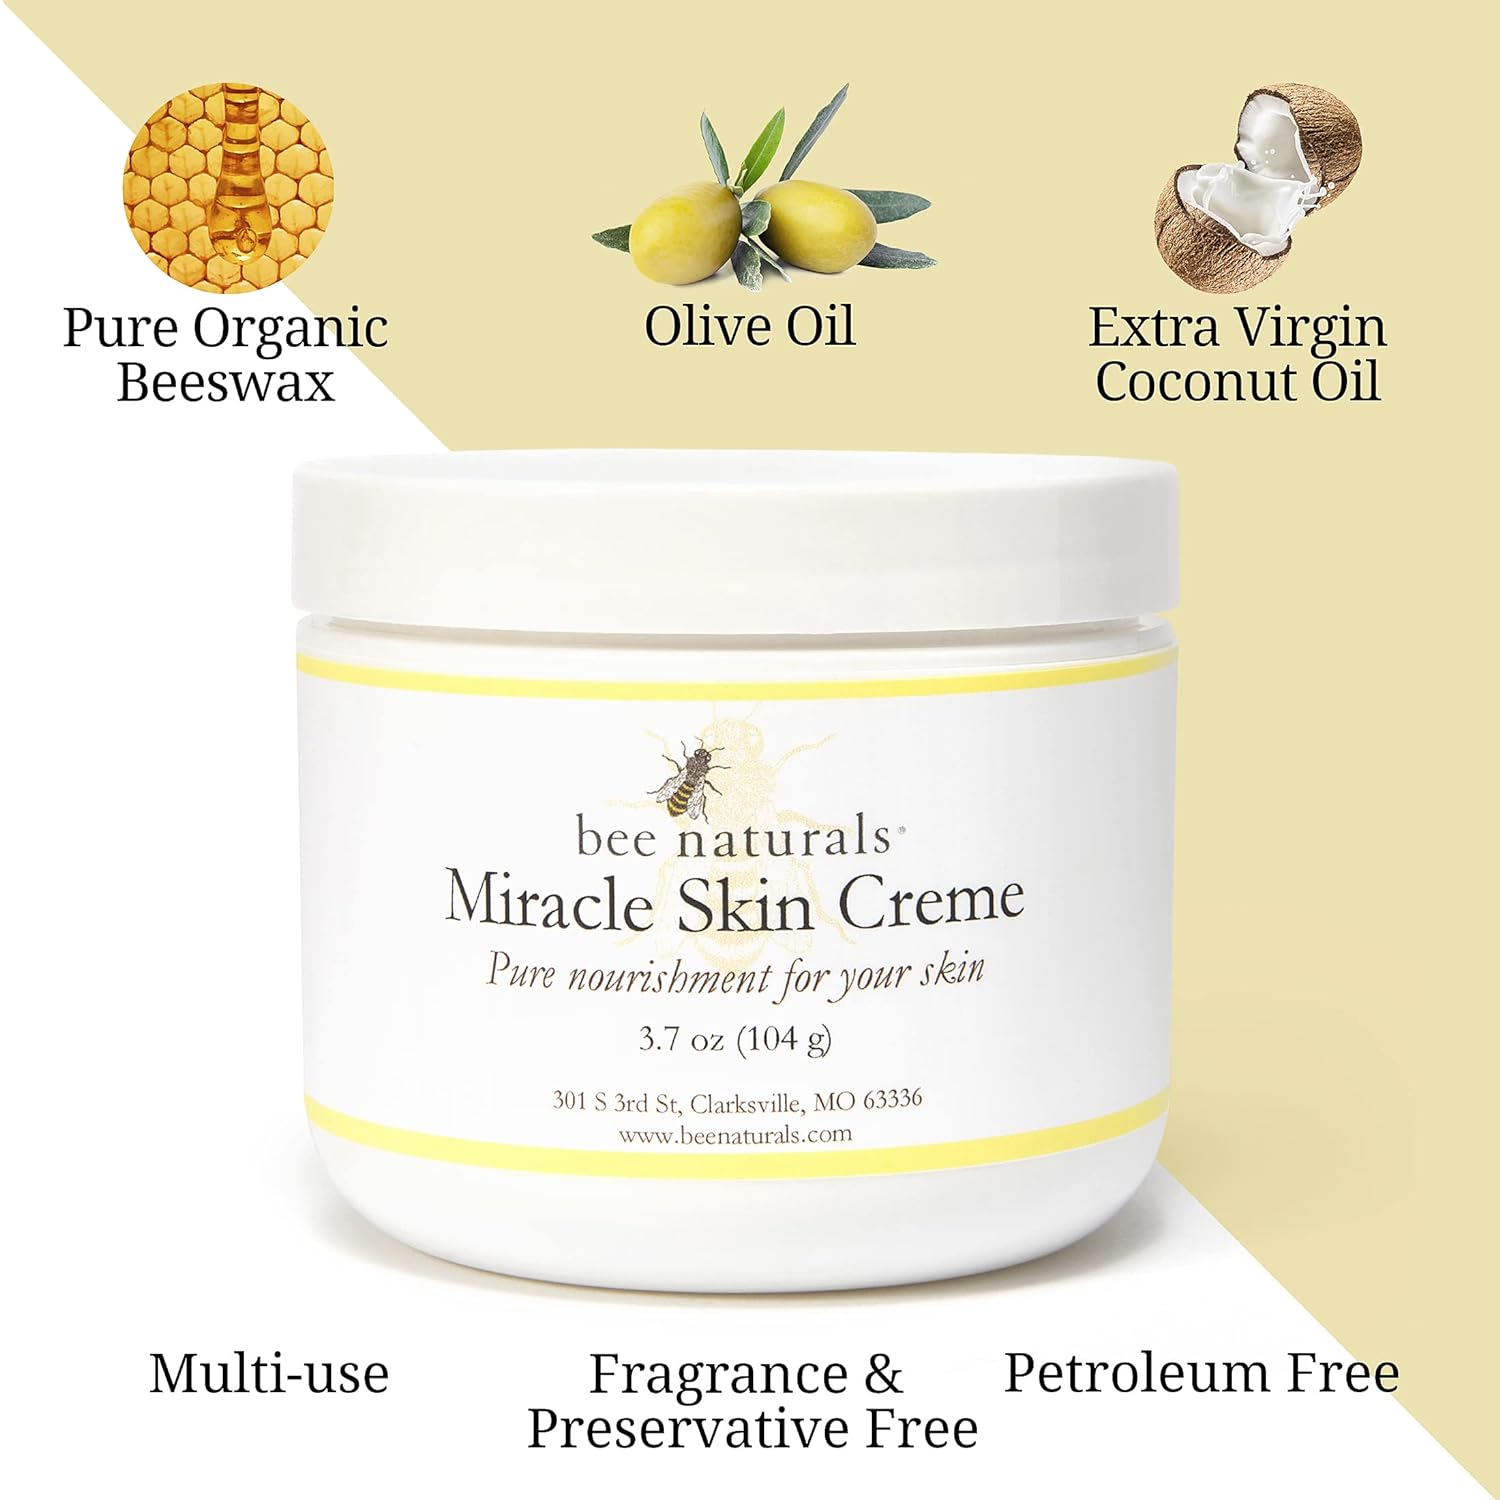 Bee Naturals Miracle Skin Creme - All Natural Skin Cream - Pure Nourishment for Your Skin (4 Oz) : Skin Care Products : Beauty & Personal Care